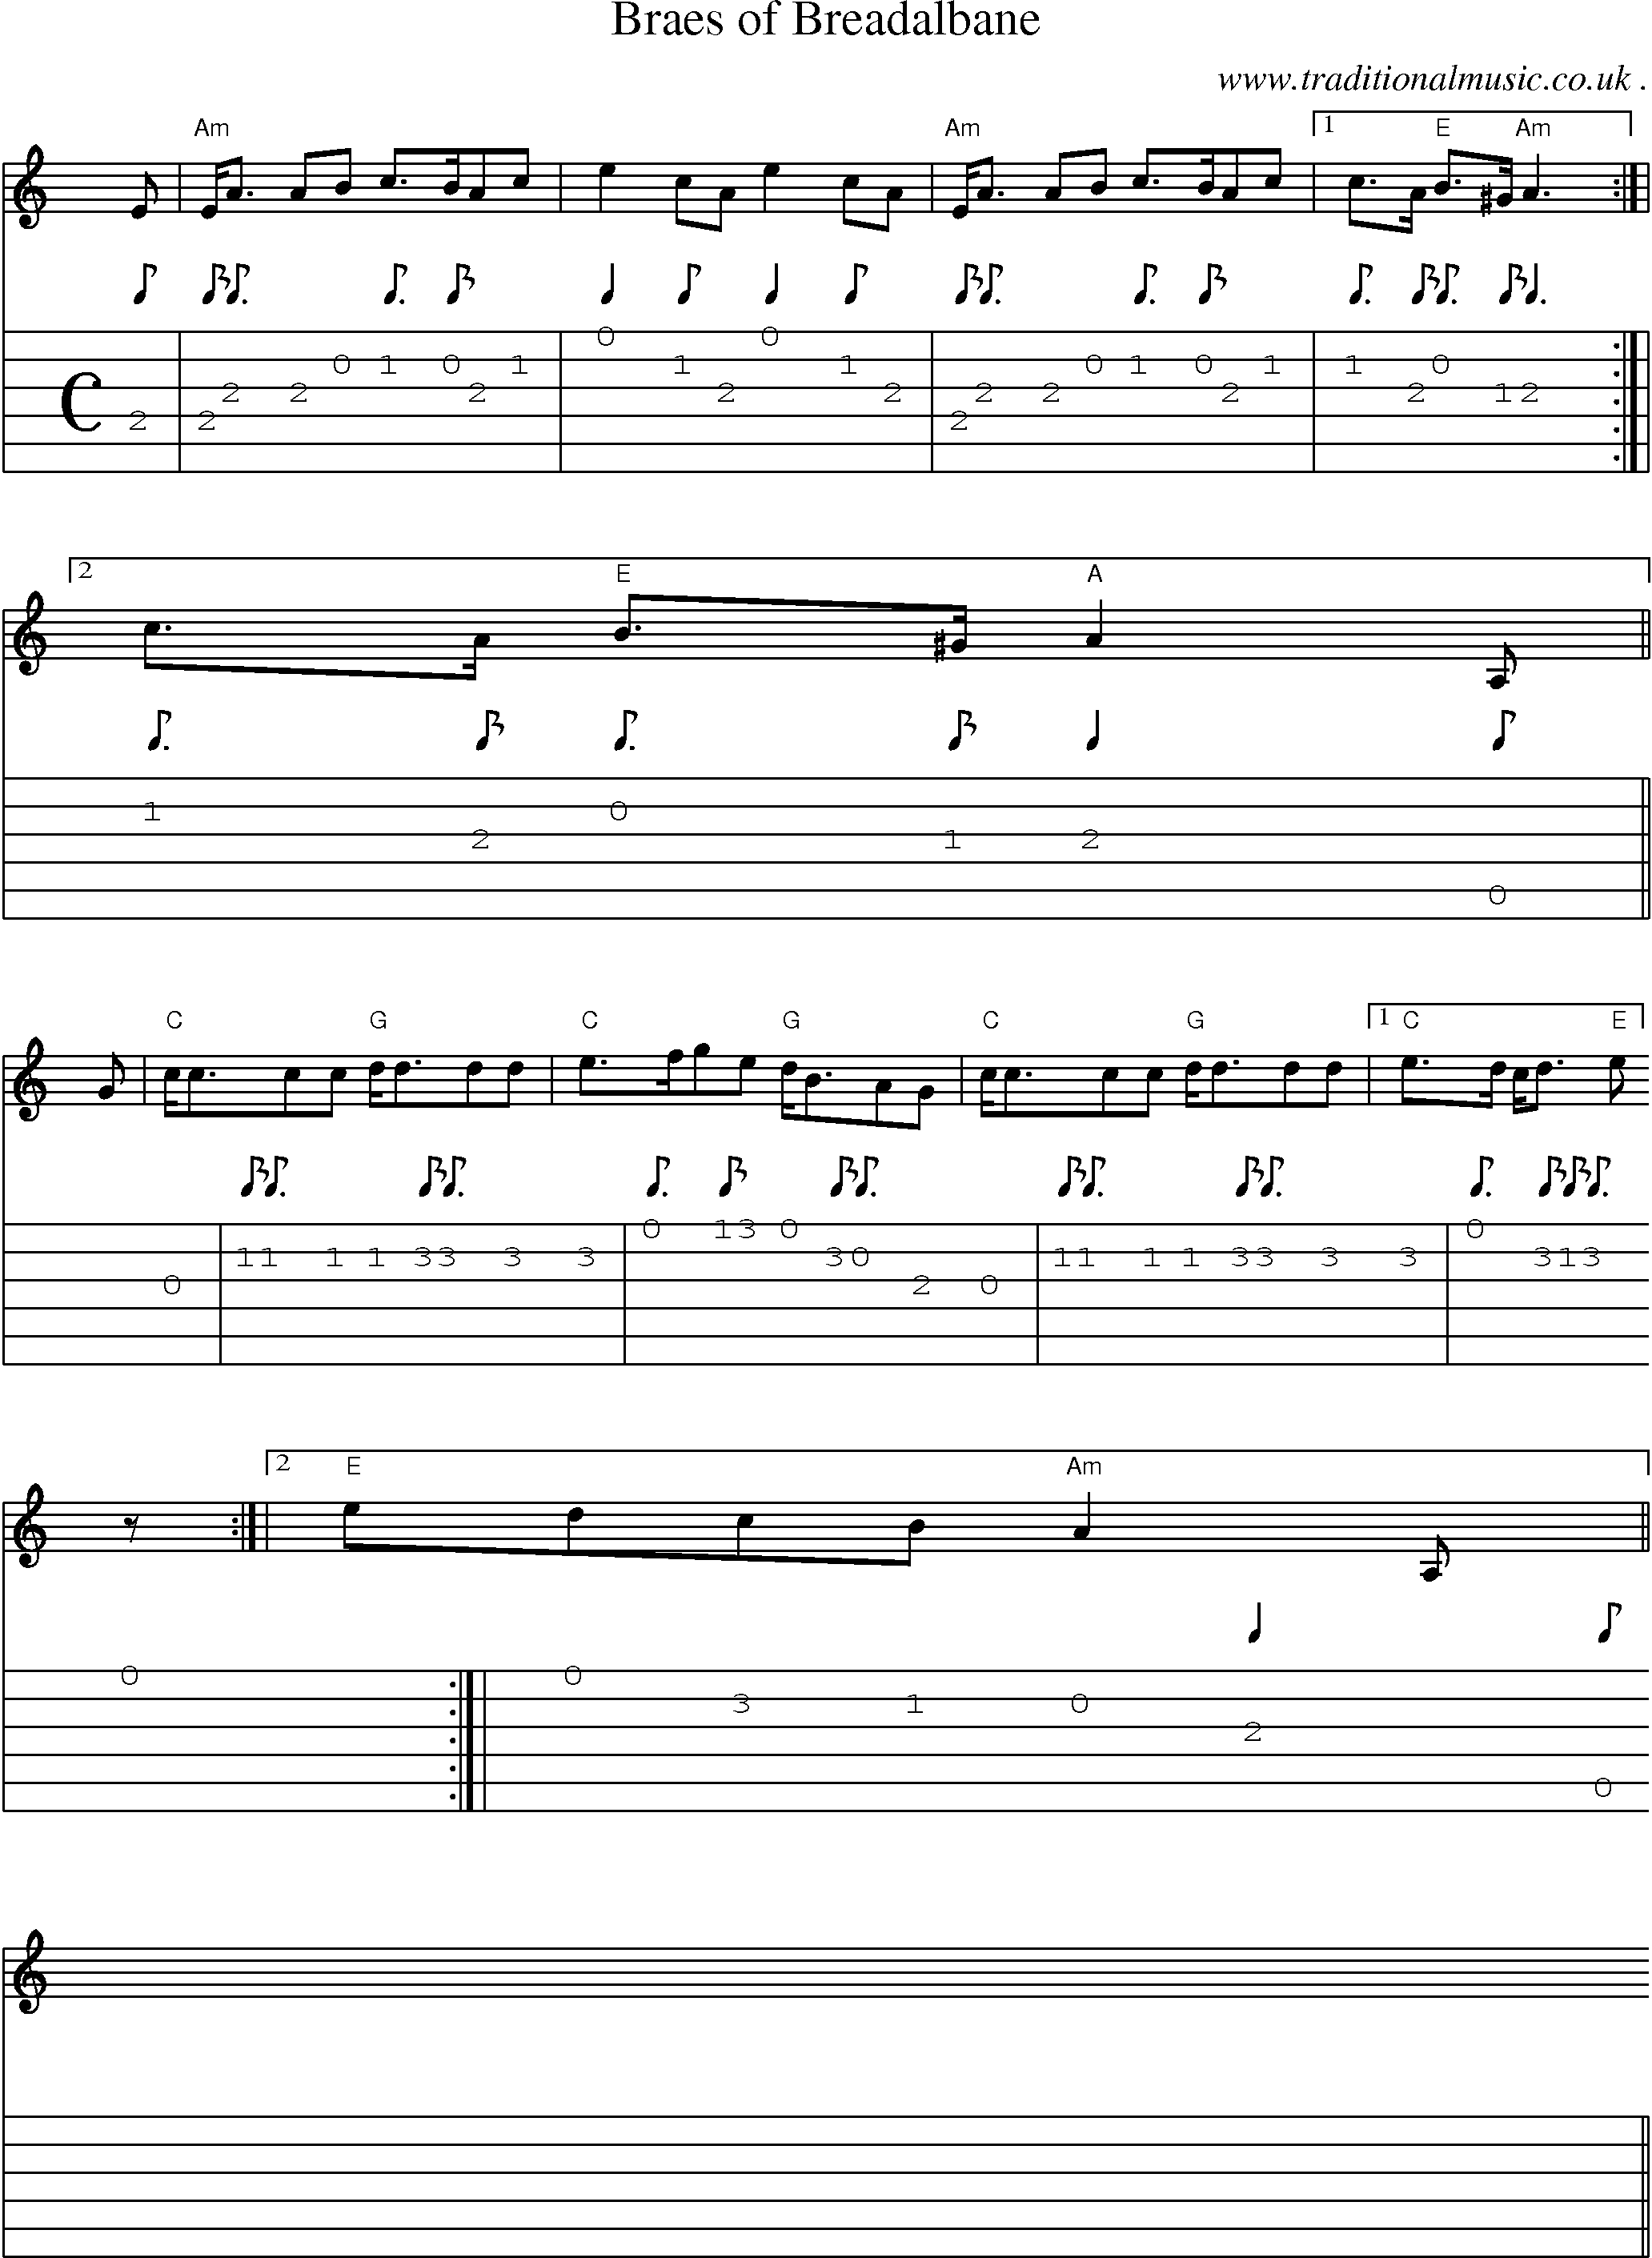 Sheet-music  score, Chords and Guitar Tabs for Braes Of Breadalbane